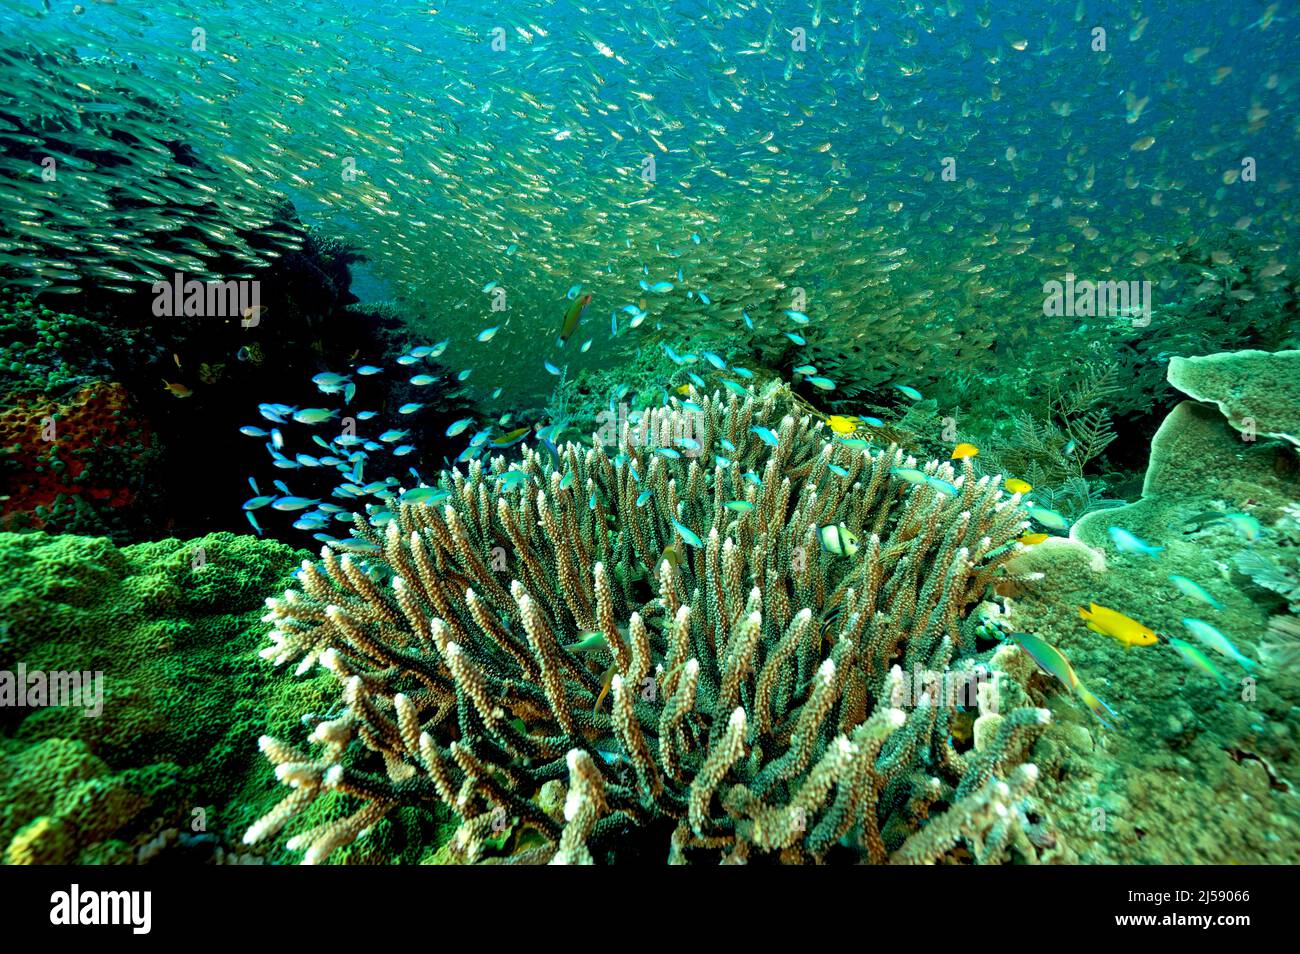 Reef scenic with glass fishes and blue damsels, Raja Ampat Indonesia. Stock Photo